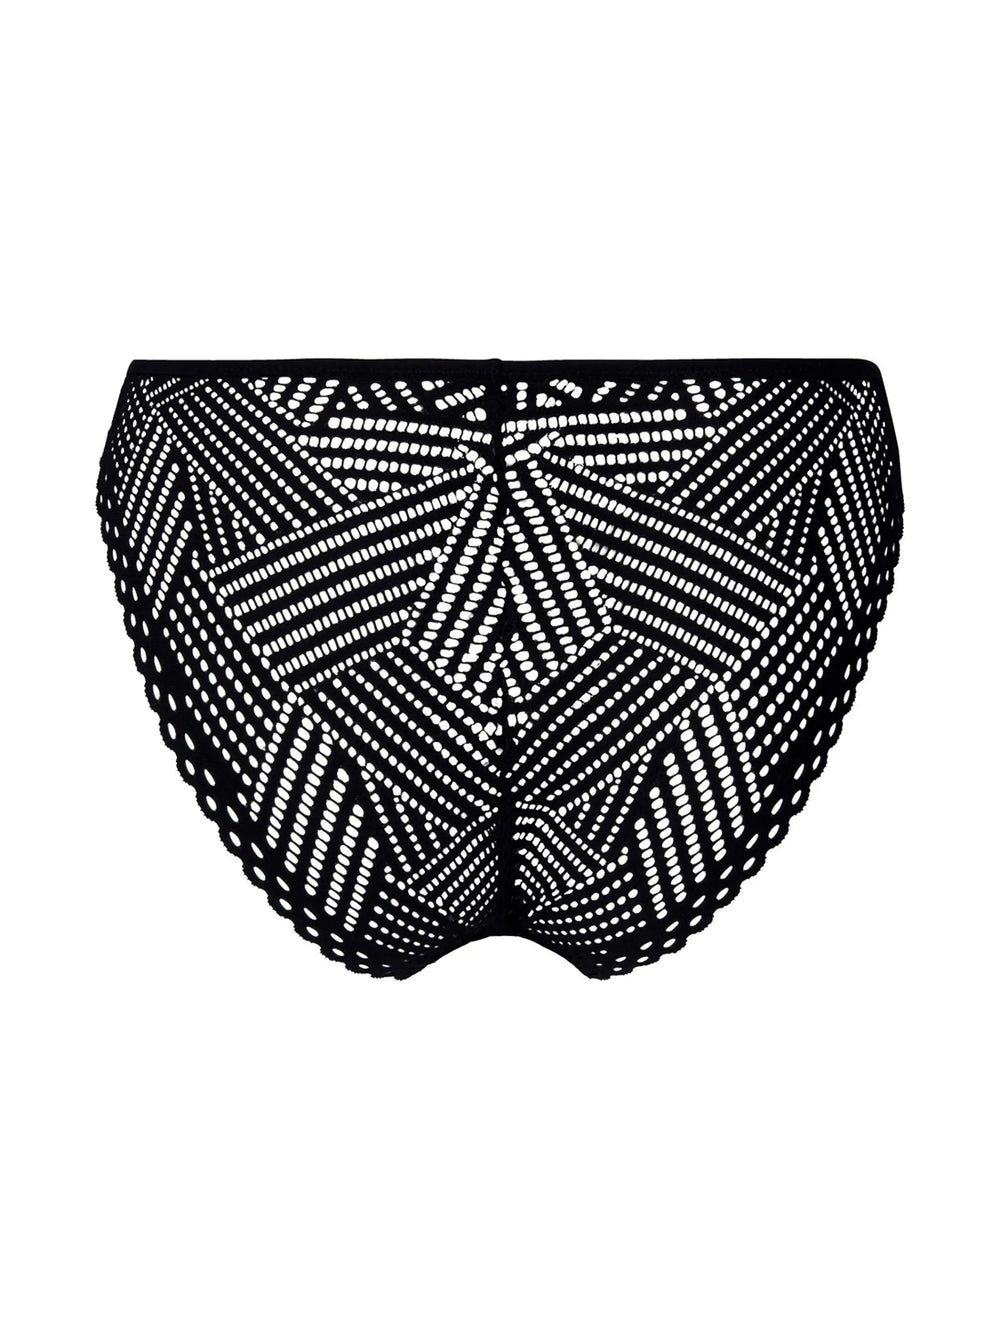 Antigel By Lise Charmel Tressage Graphic Low Waist Brief - Tressage Noir Brief Antigel by Lise Charmel 